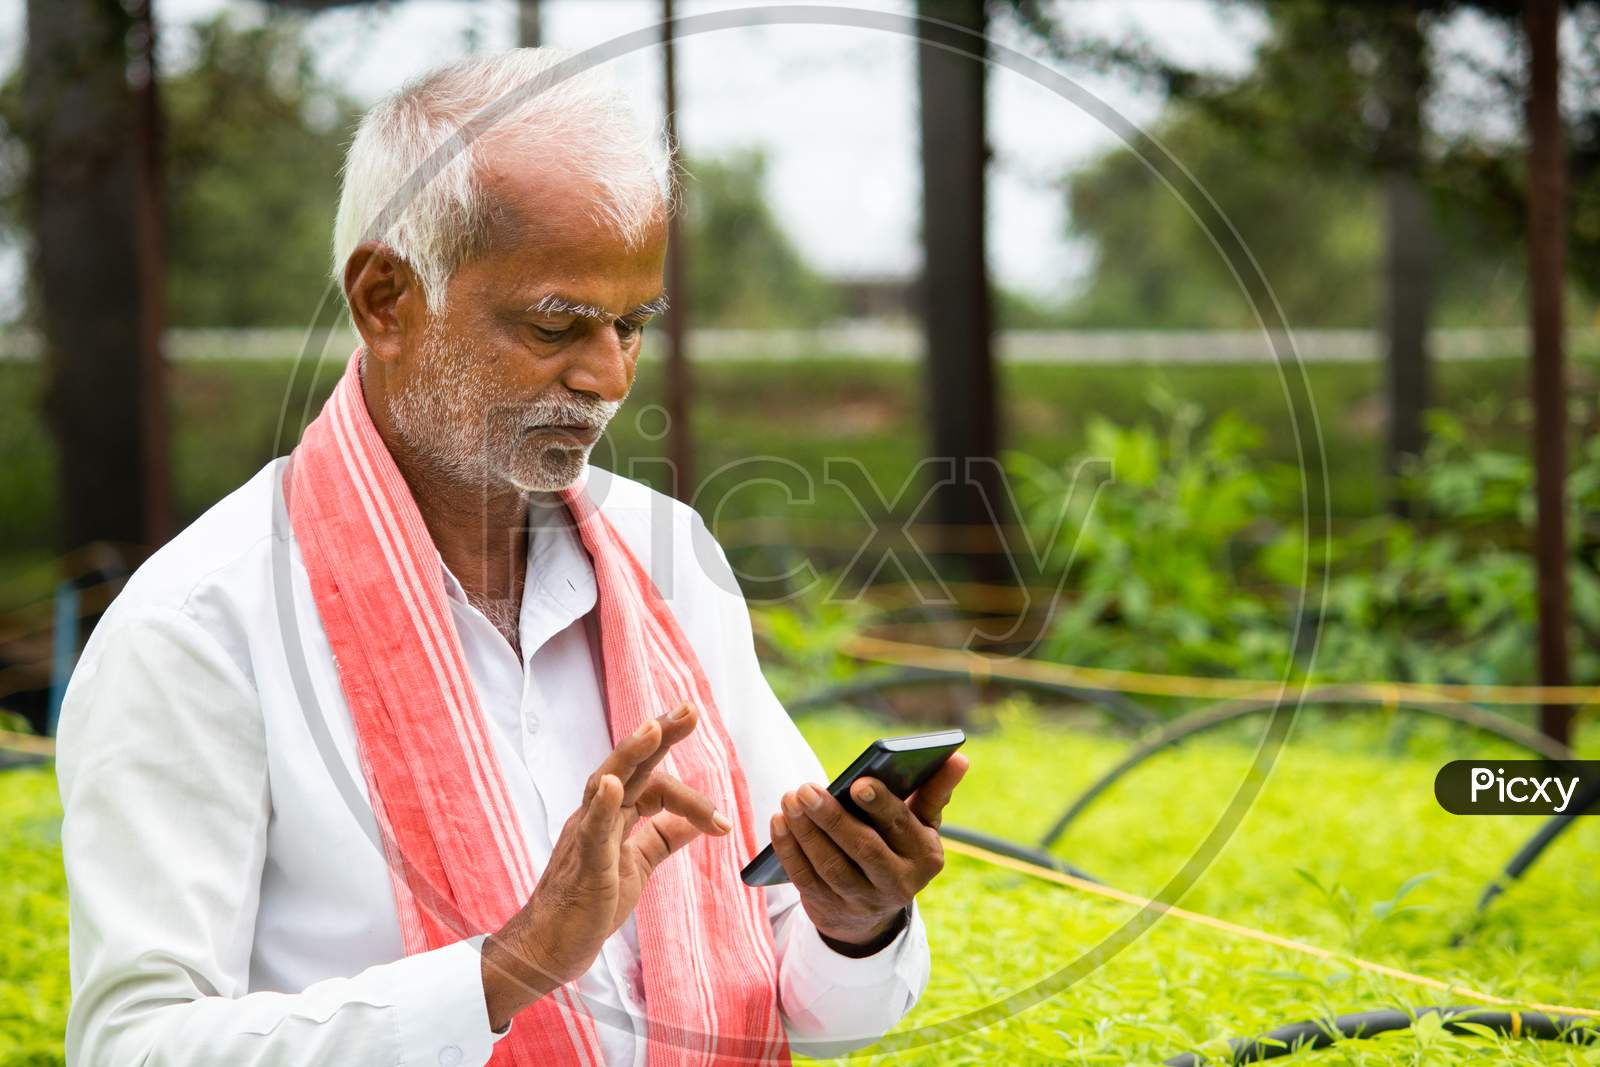 Indian Farmer Busy Using Mobile Phone While Sitting In Between The Crop Seedlings Inside Greenhouse Or Poly House - Concept Of Farmer Using Technology And Internet